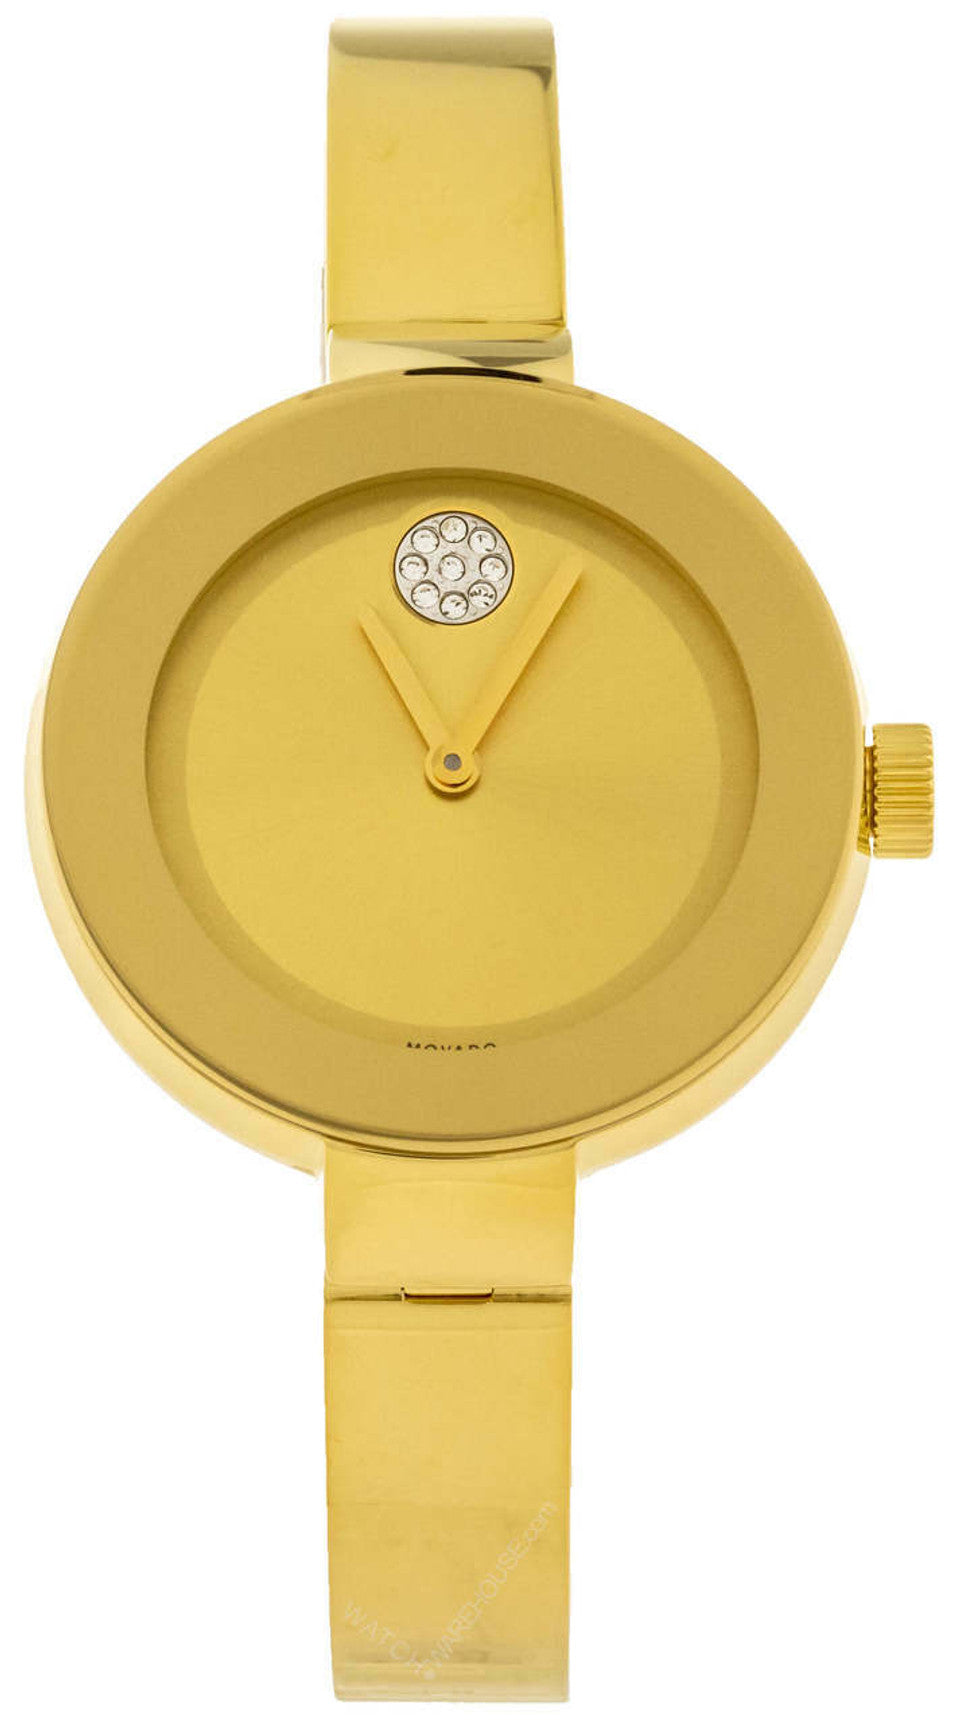 NEW MOVADO Women's 3600201 BOLD Champagne Dial Gold Quartz Watch MSRP $595